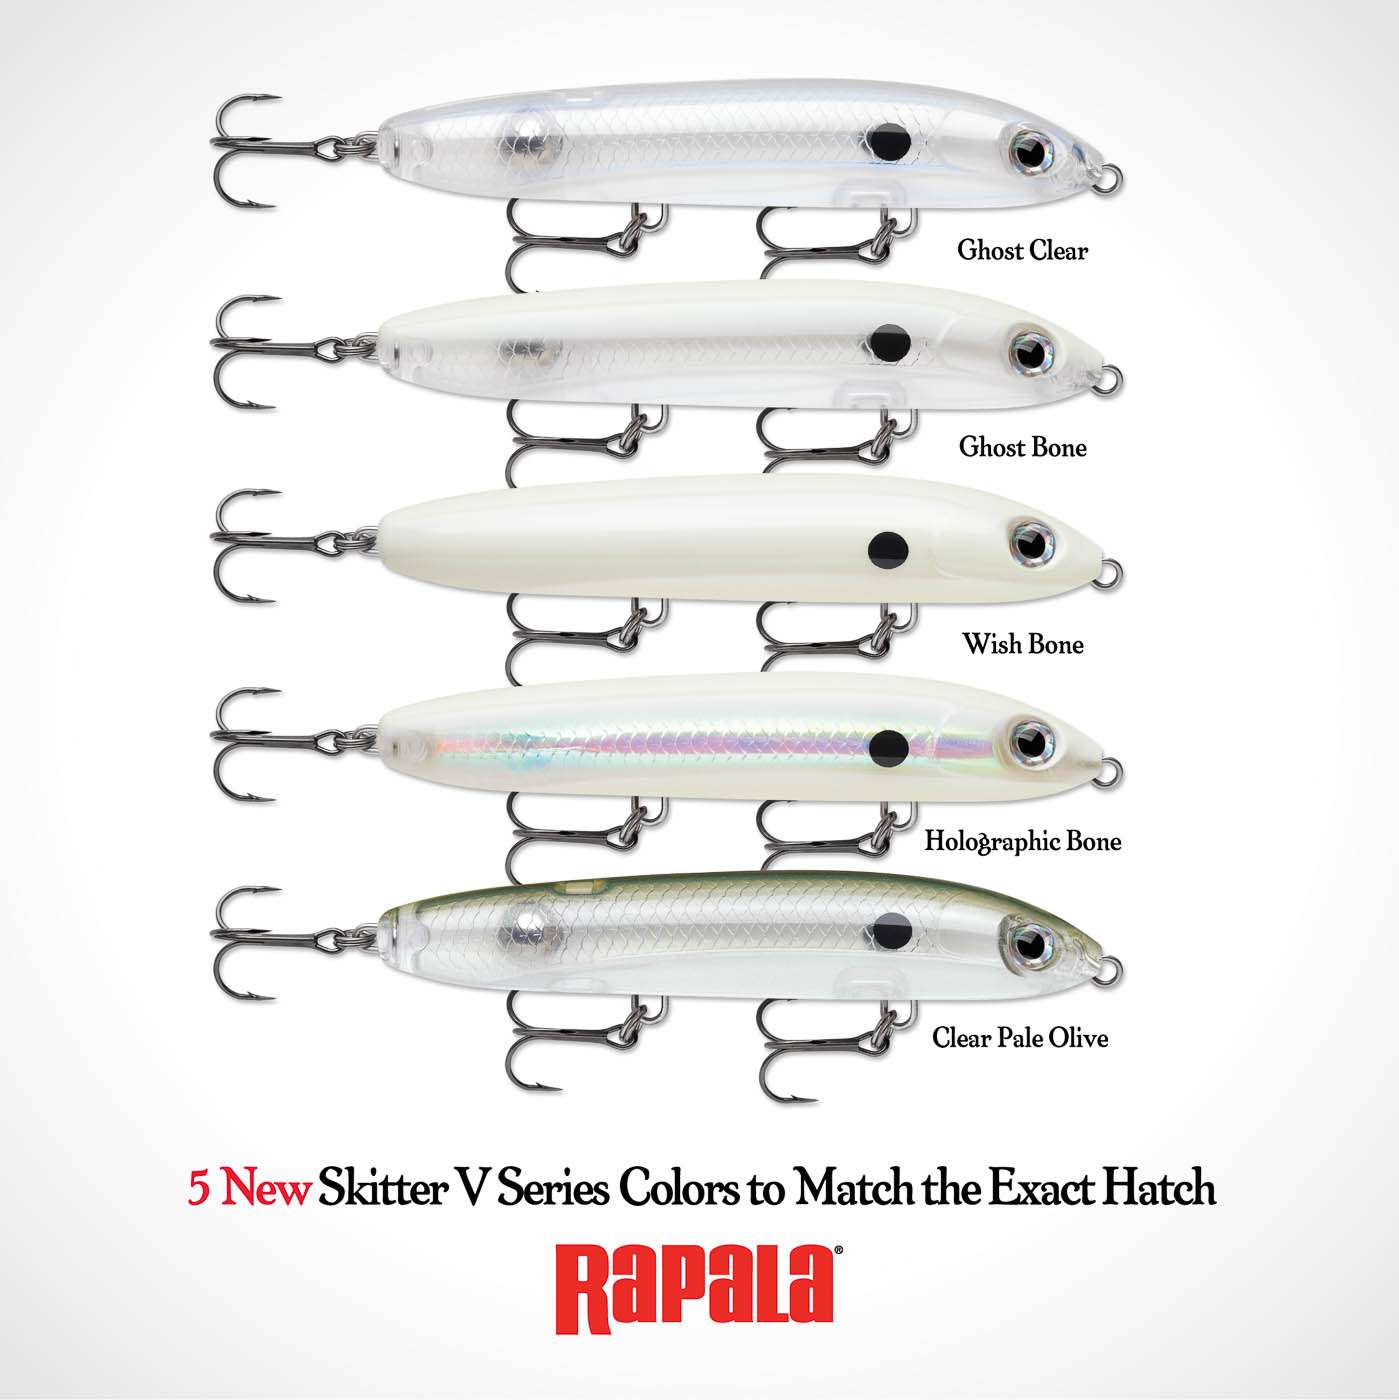 <p><strong>Rapala Skitter V</strong></p><p>The Skitter V features an exclusive design that radically alters the action of the lure. The V-hull body design, combined with tail weighted balance, allows the lure to cut quick with the snap of the rod, ending with a soft, long glide on slack line. Now featuring 5 new colors: Clear Pale Olive, Ghost Clear, Wish Bone, Ghost Bone and Holographic Bone. $11.29.  <a href=